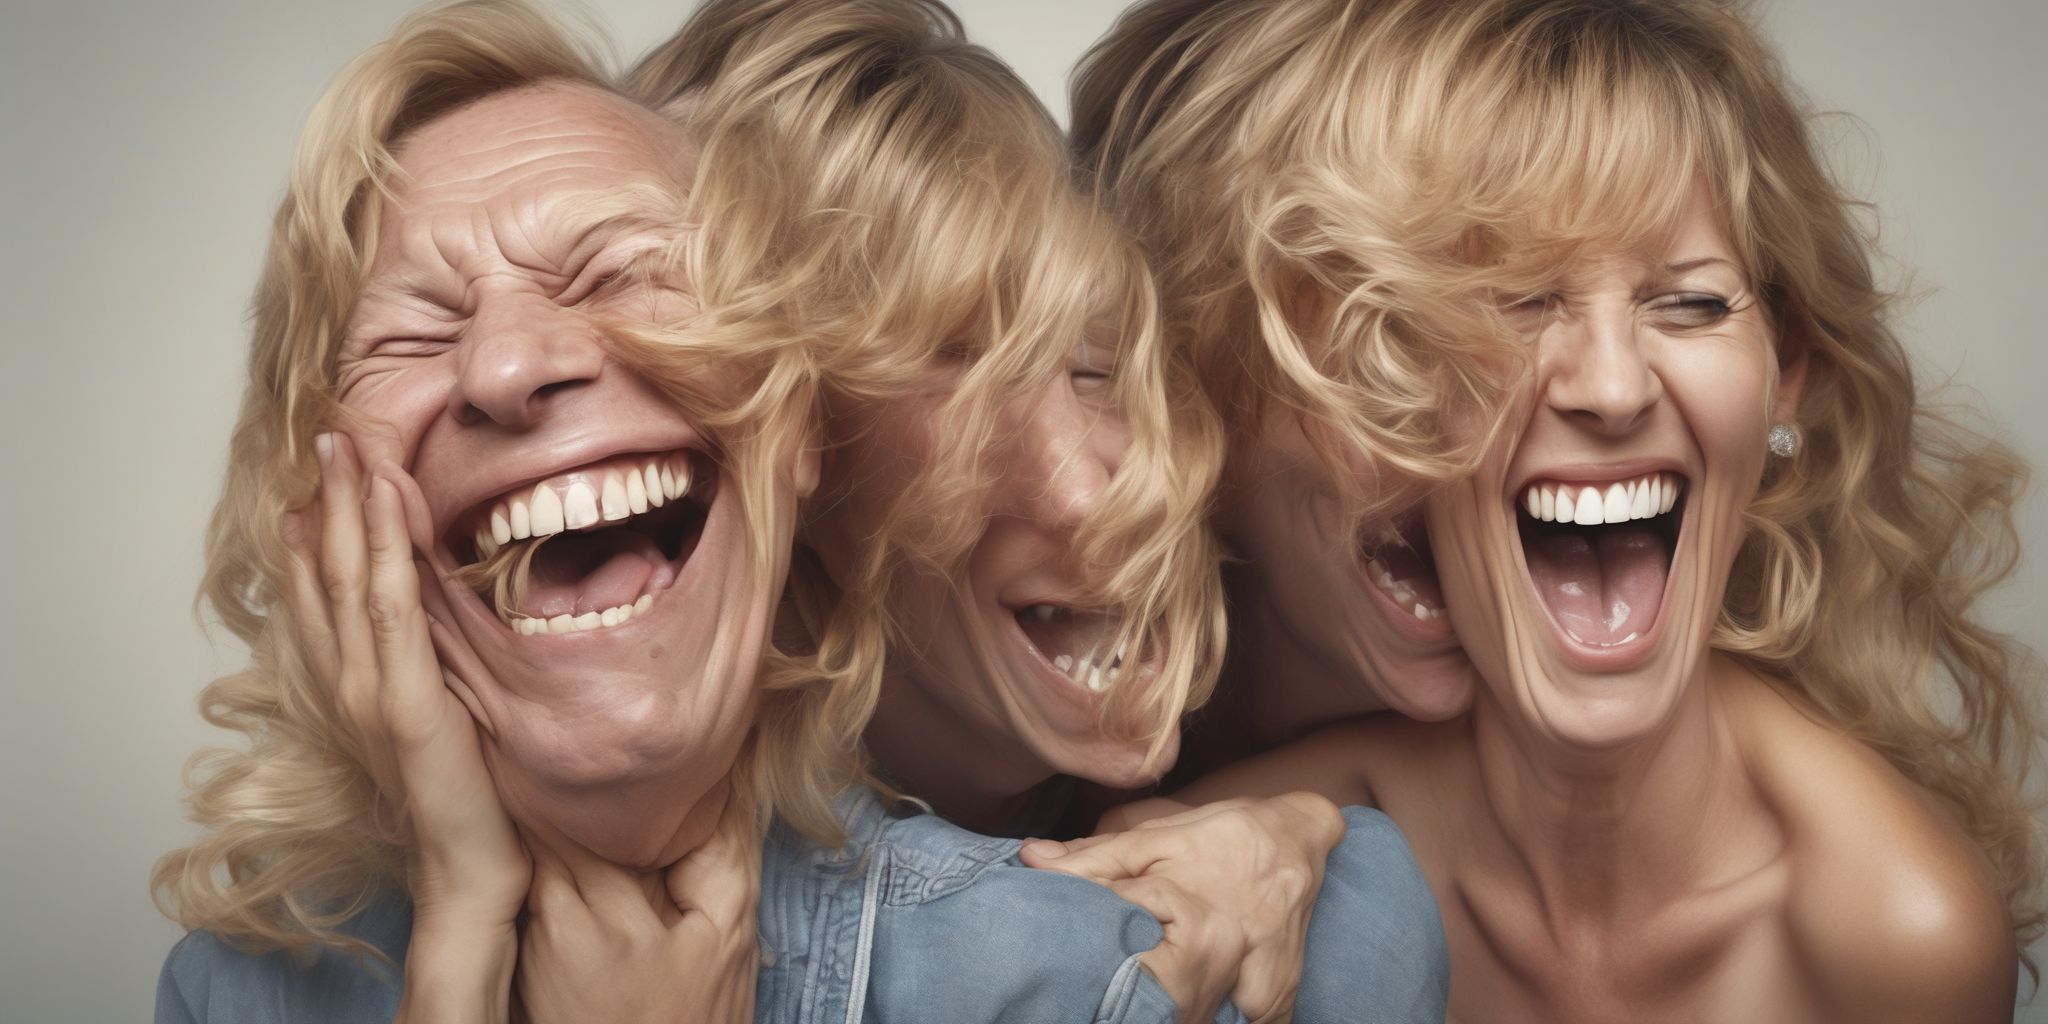 Laugh  in realistic, photographic style